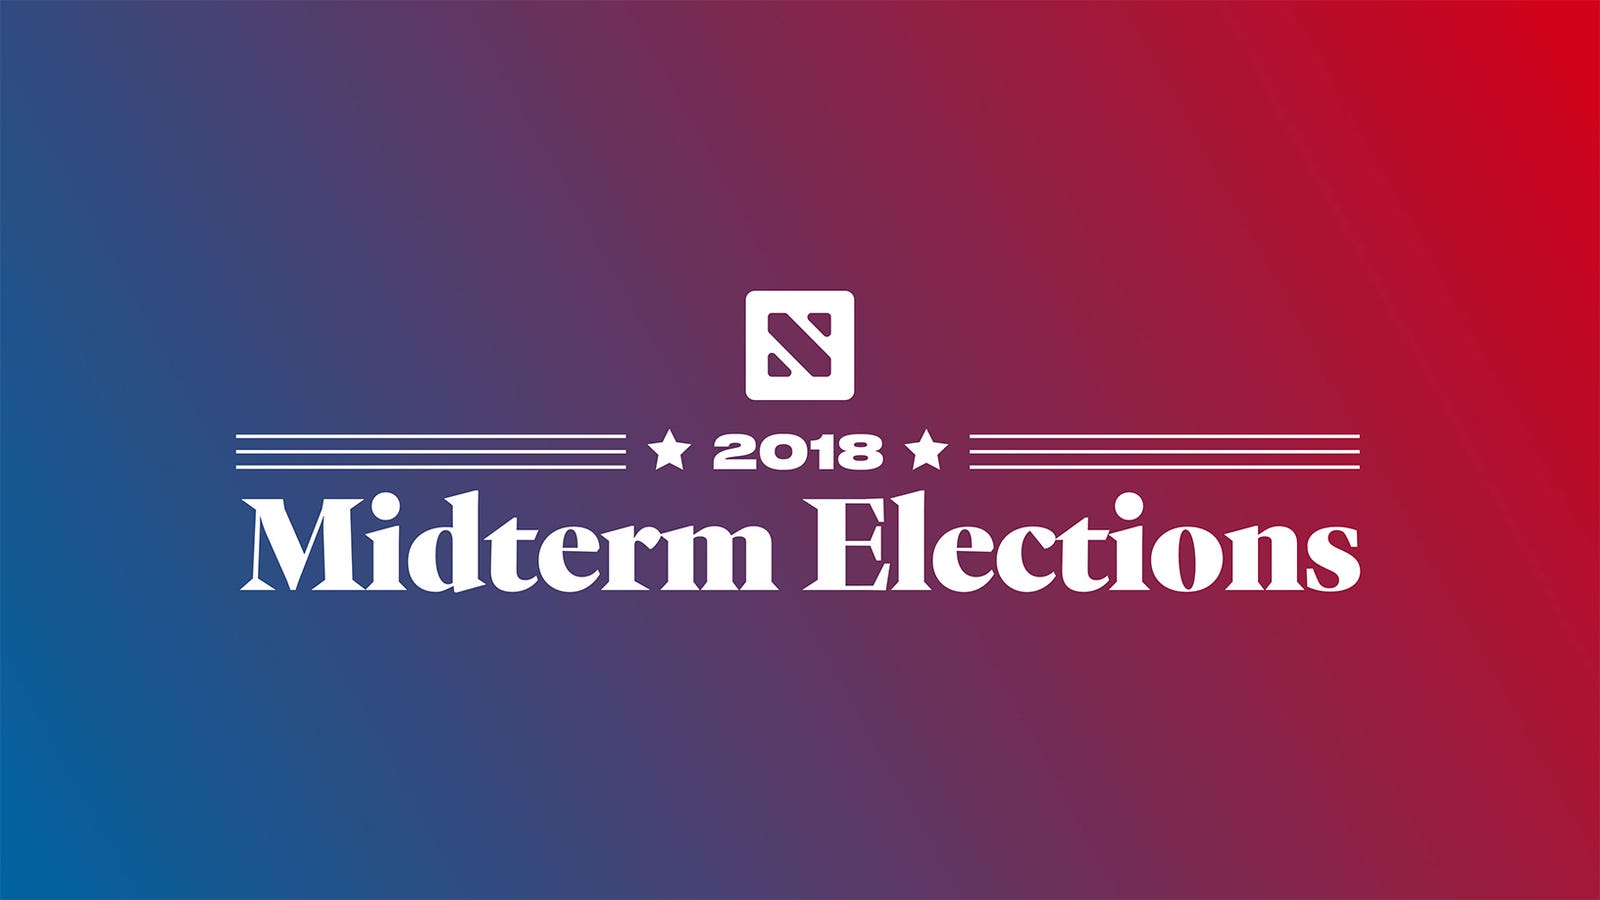 photo of Get a Direct Feed of Politics With Apple News' '2018 Midterm Elections' Section image